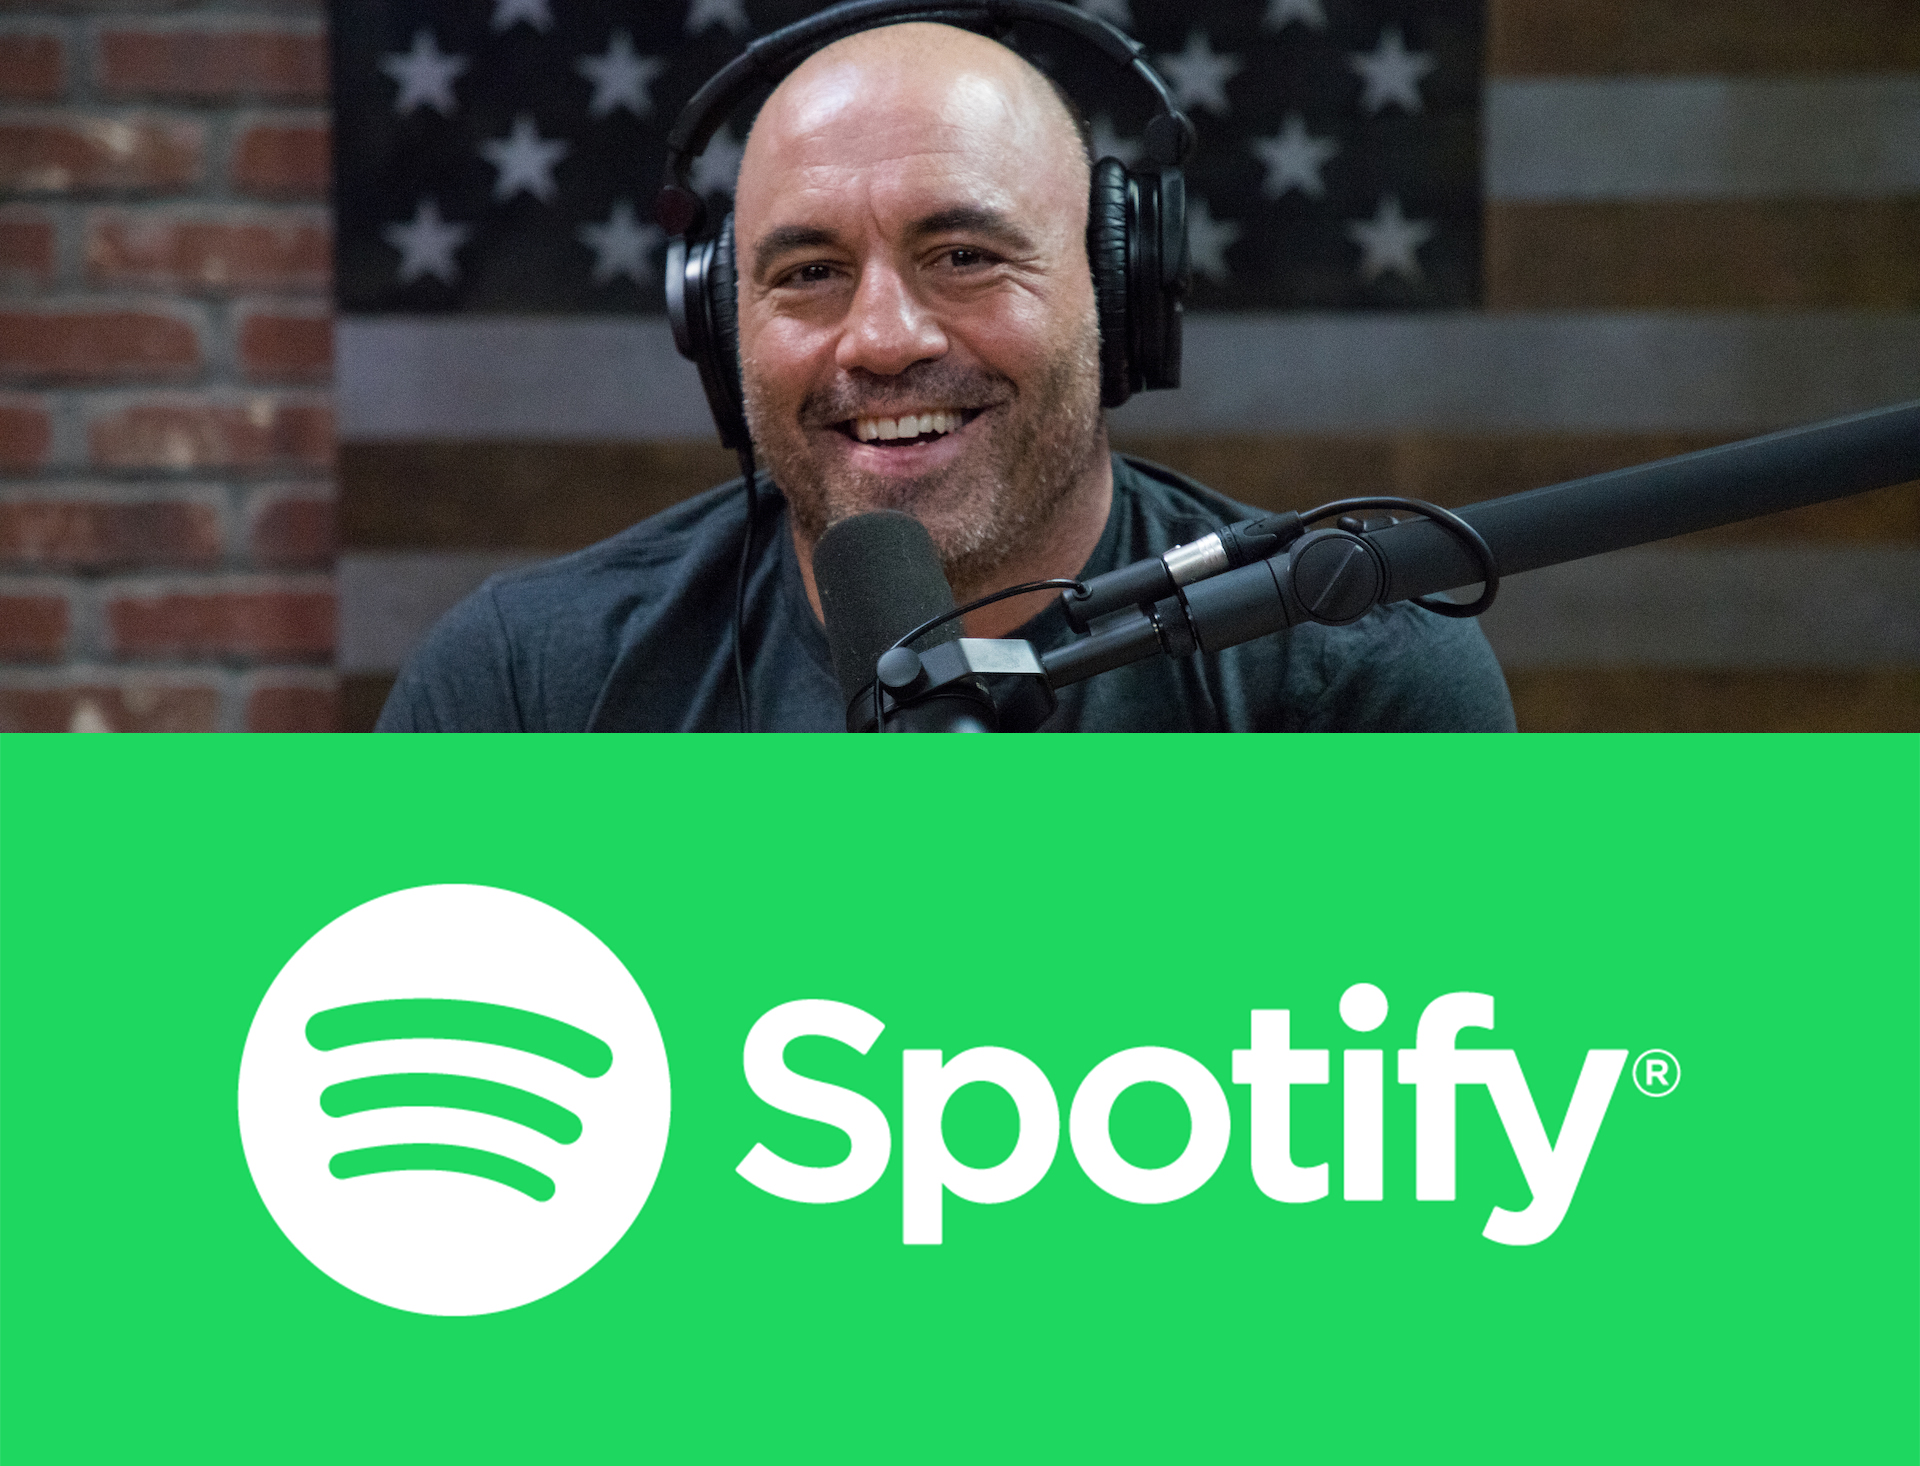 The Joe Rogan Experience moves exclusively to Spotify